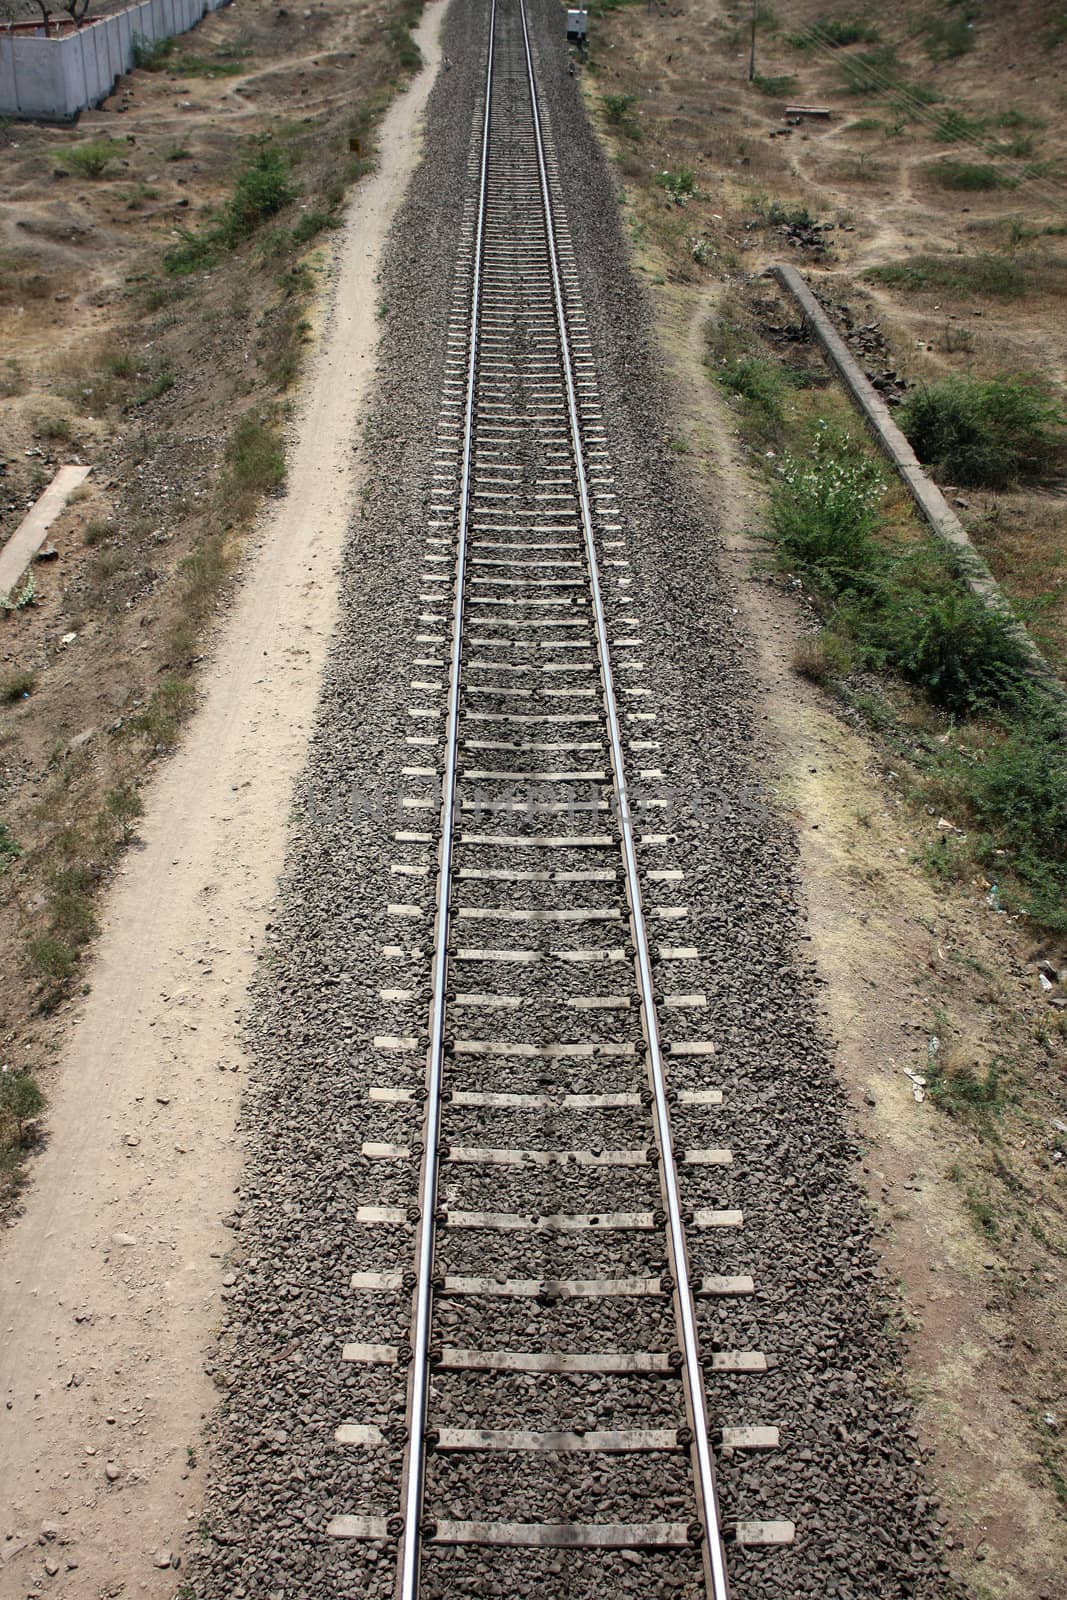 An aerial view of a straight railway track.